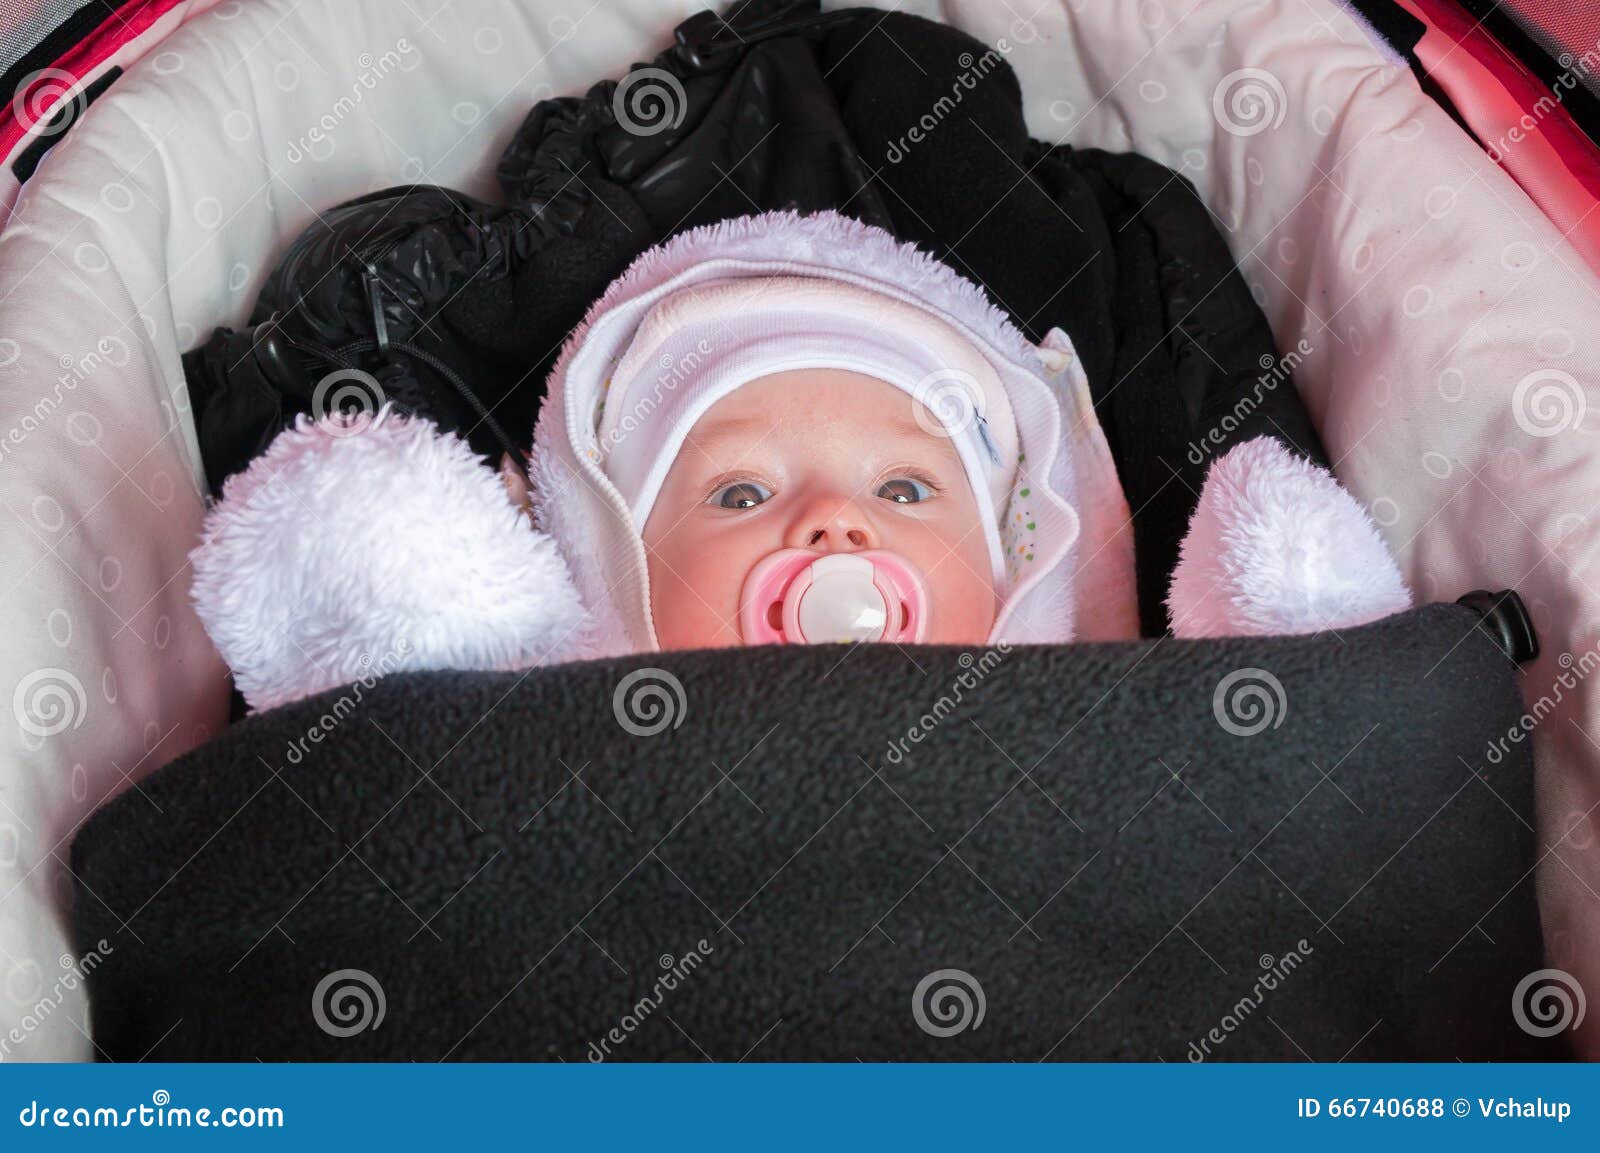 baby in stroller is dressed and warmly wrapped in freezing winter